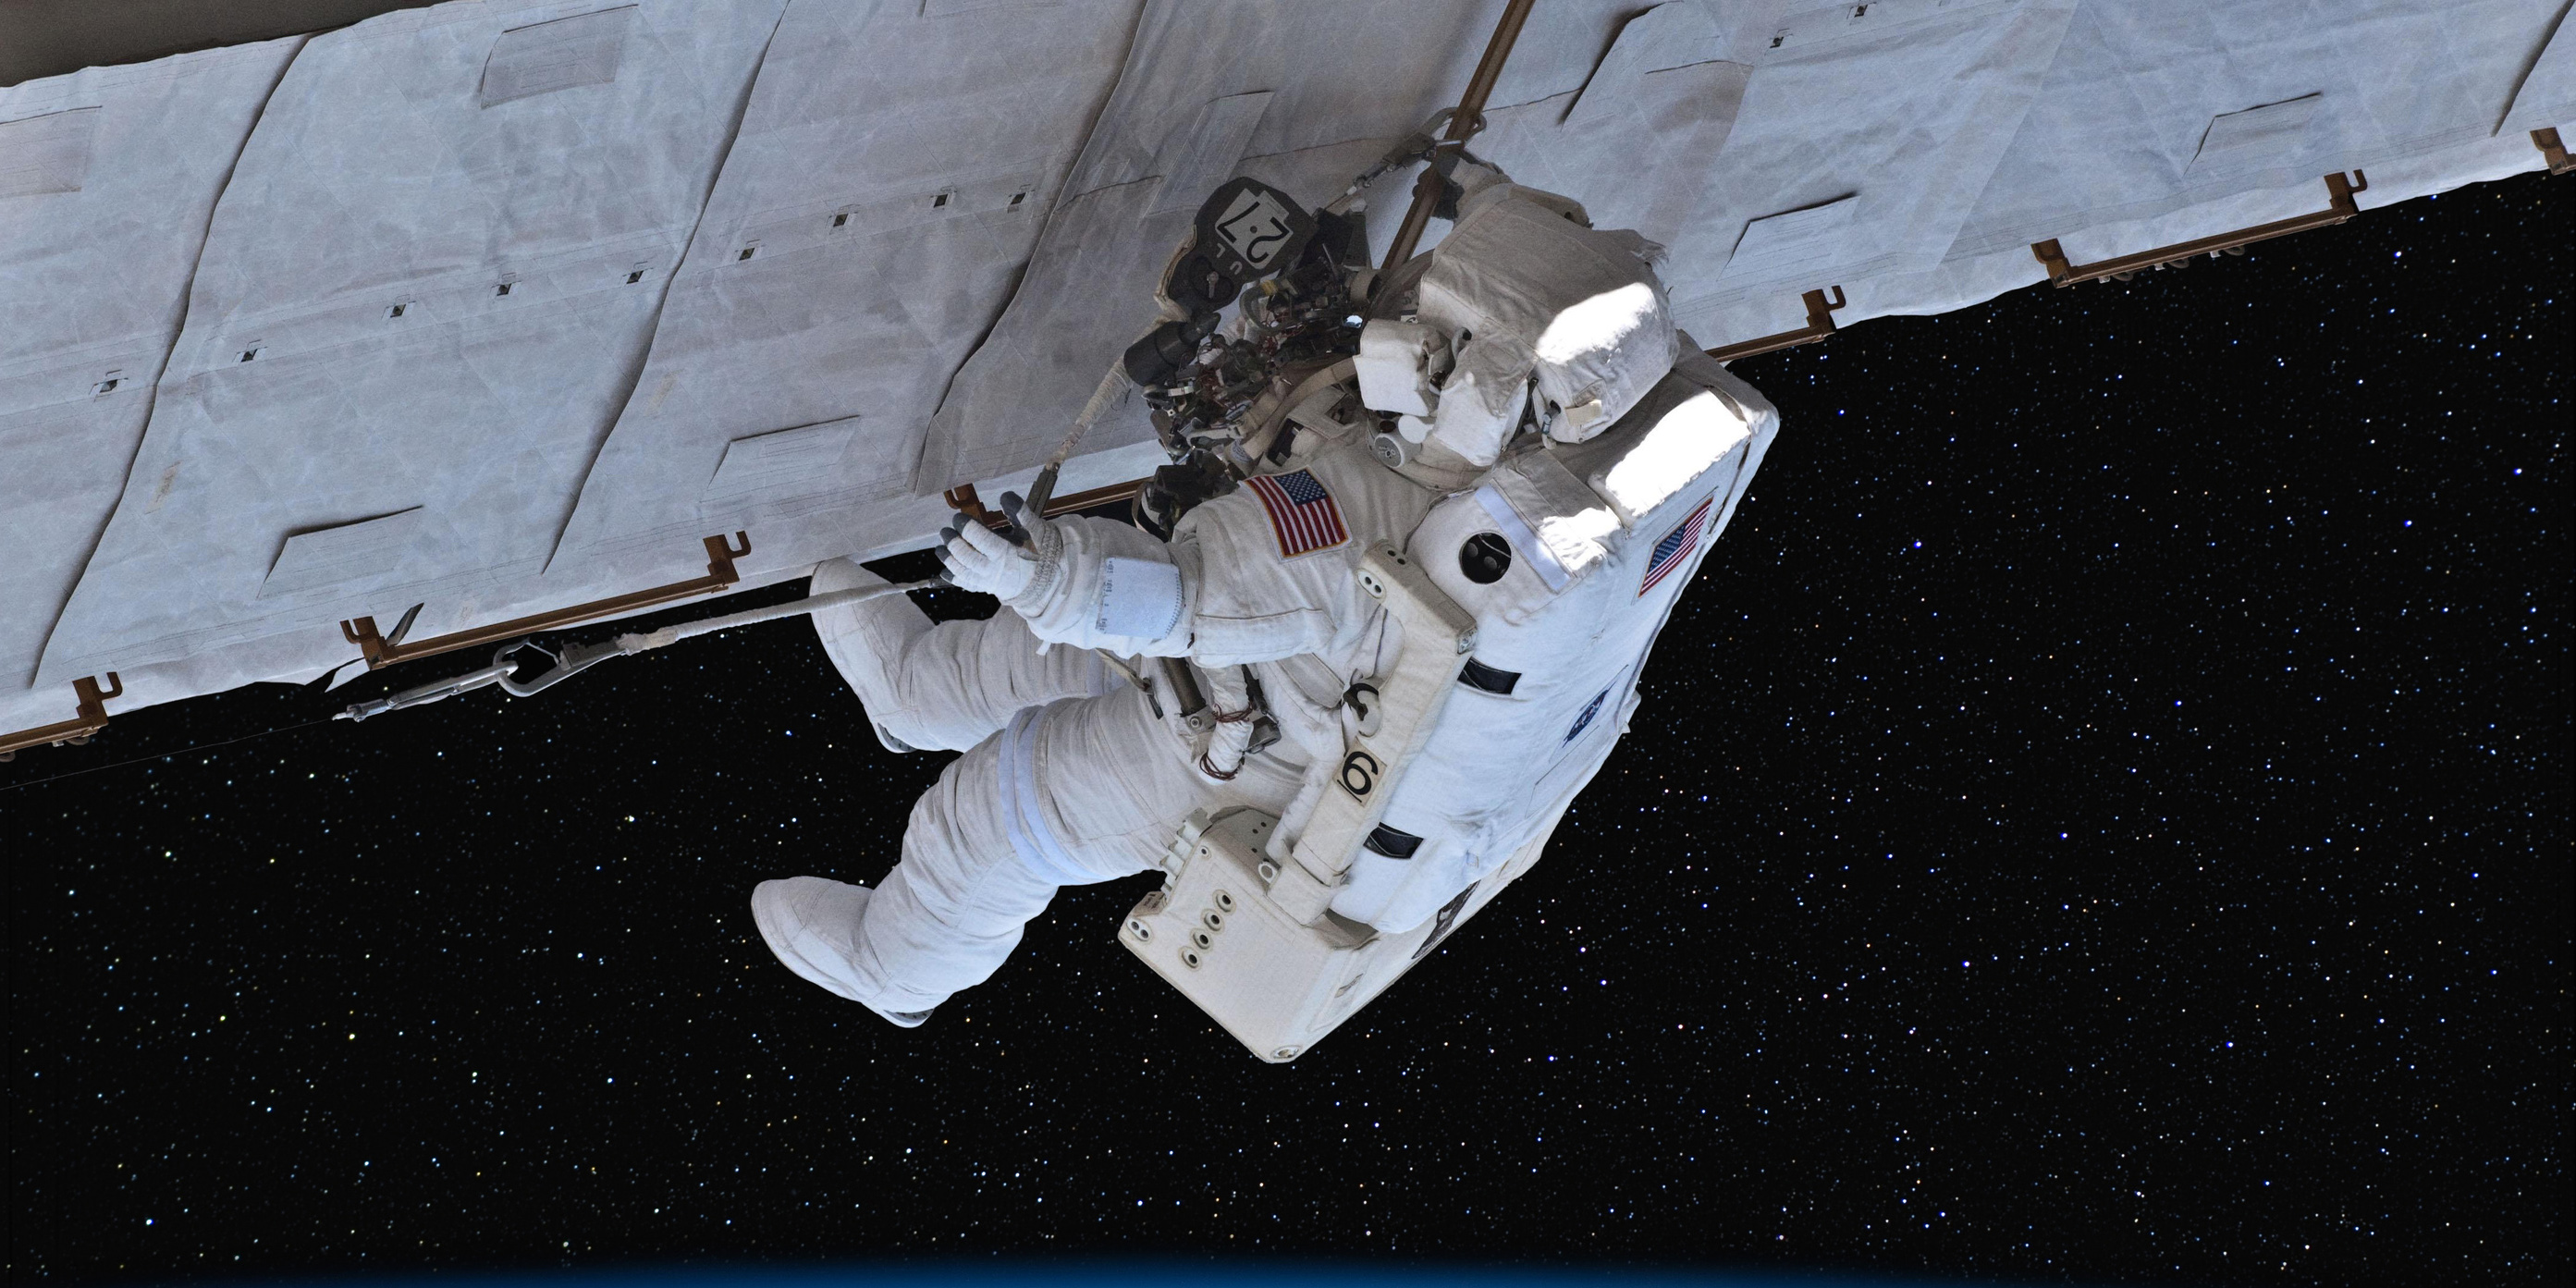 Astronaut wearing a white space suit working in space.